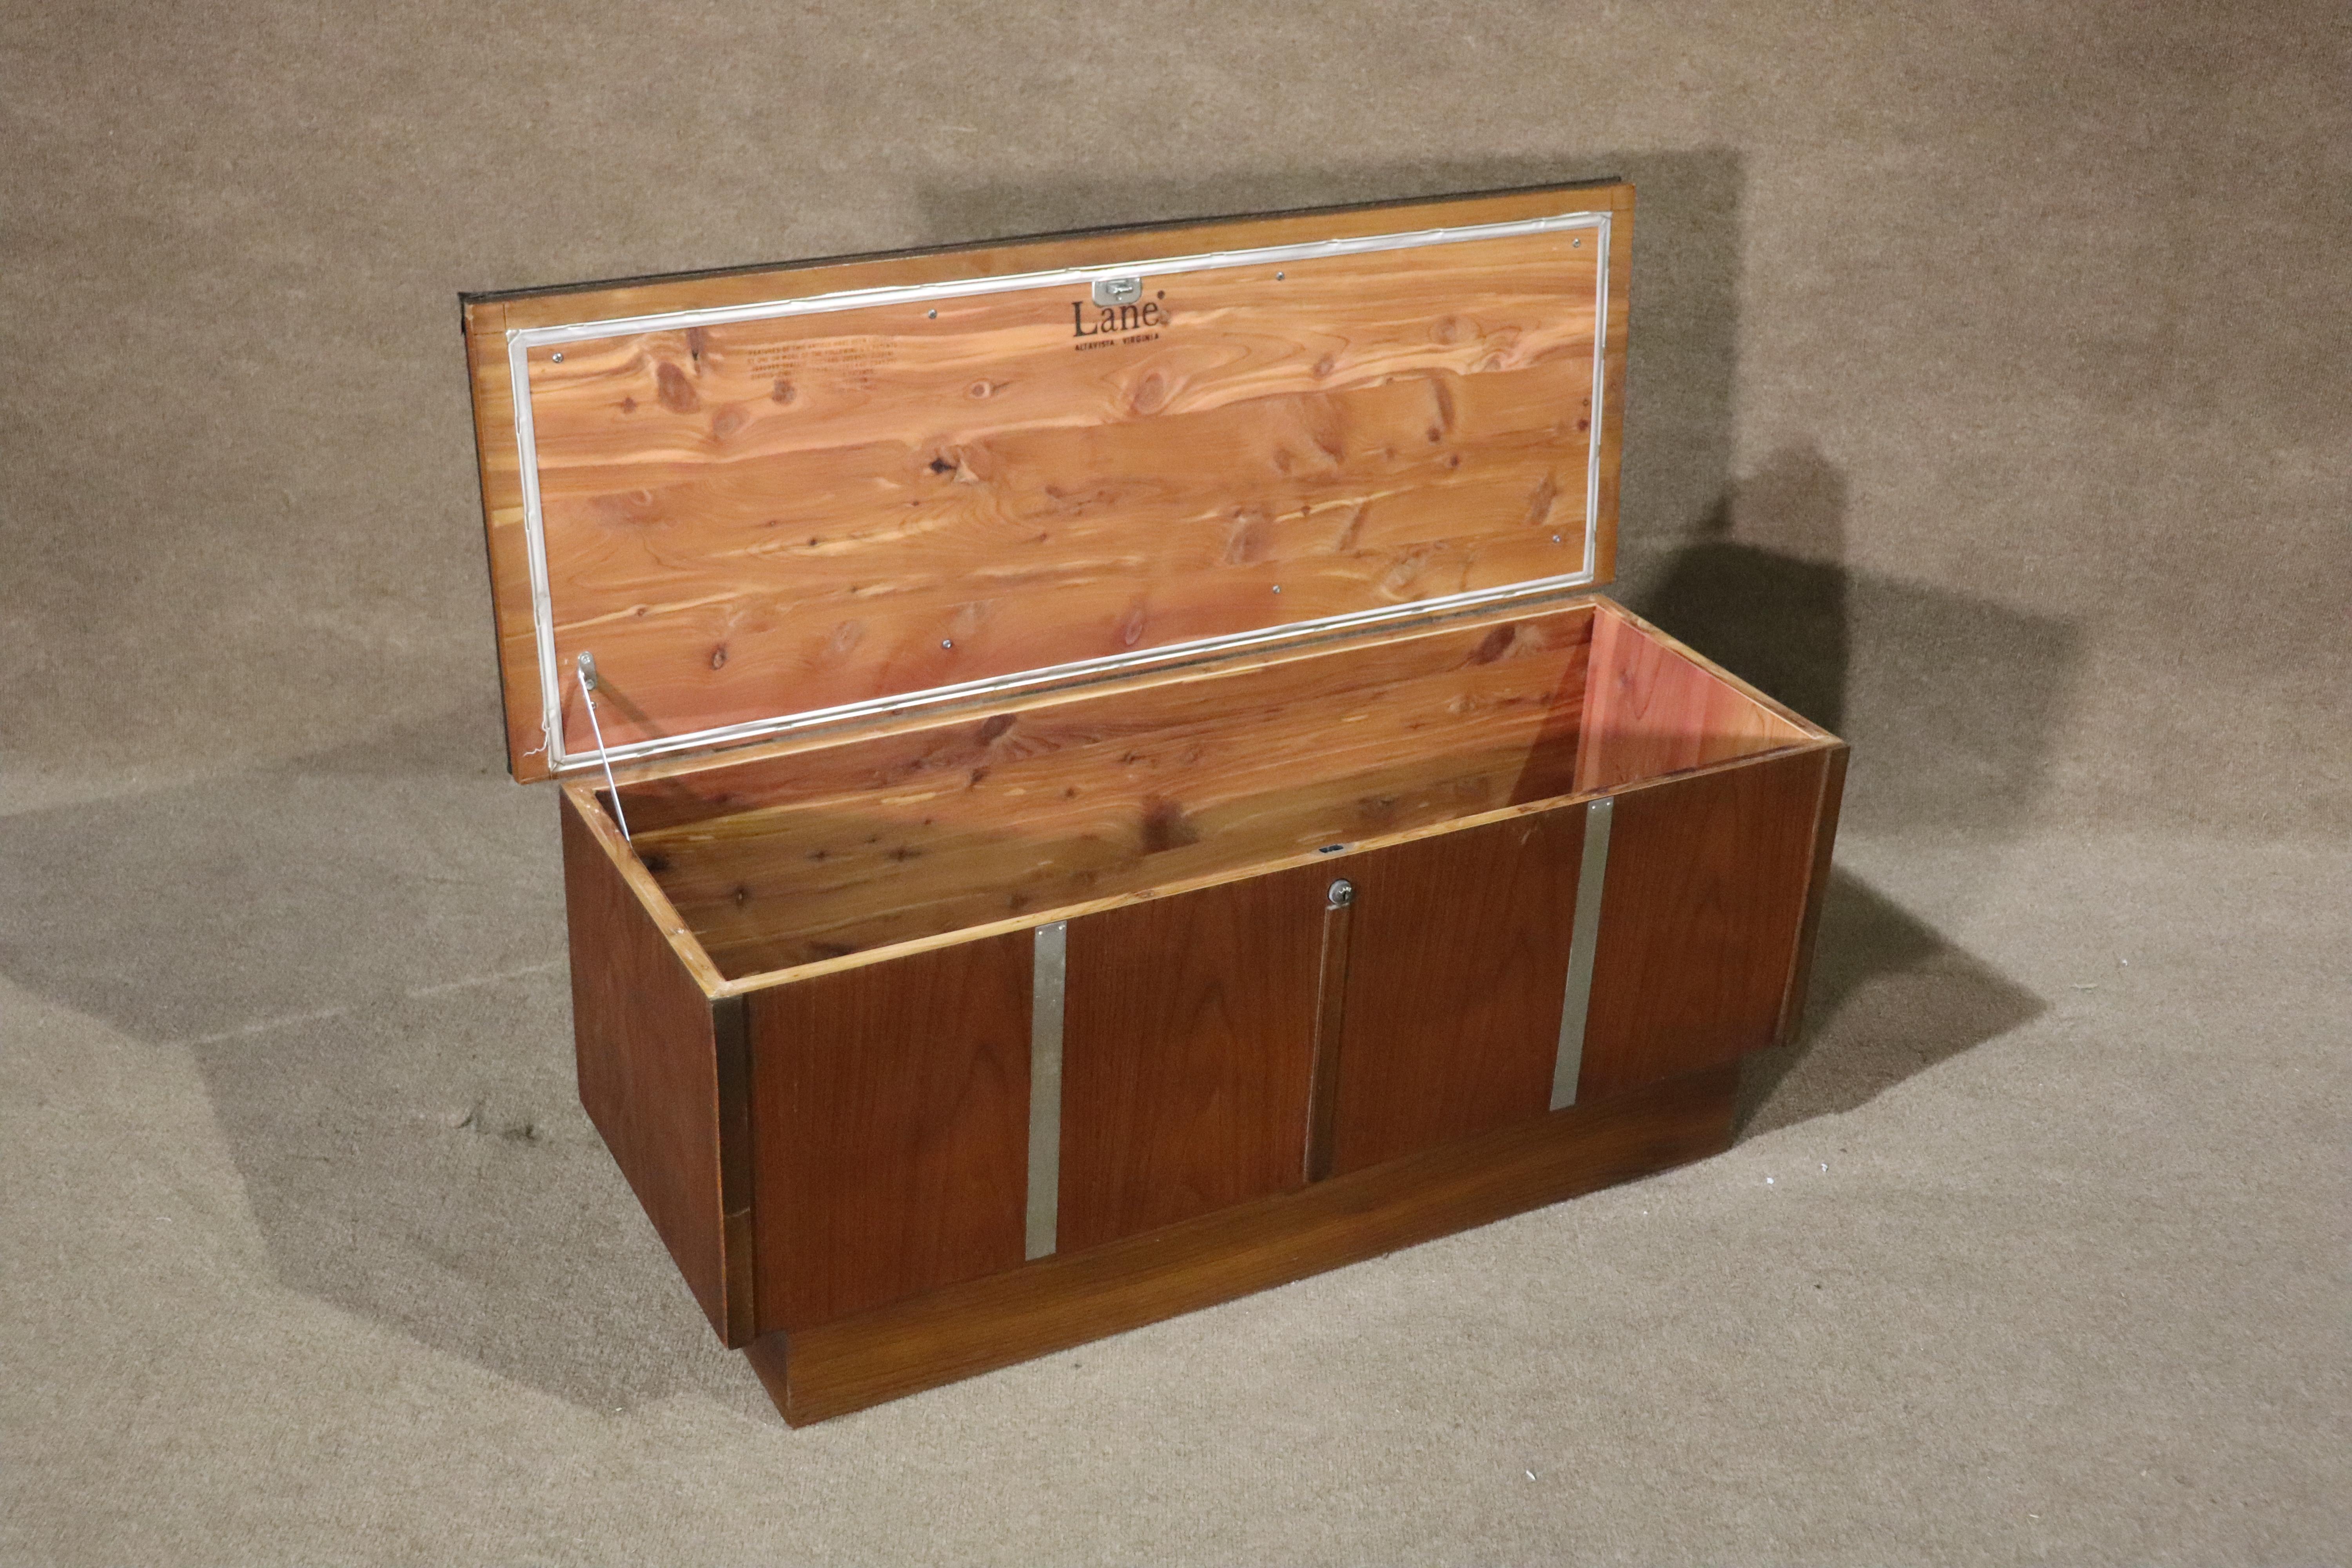 Lane furniture made blanket chest with upholstered bench top. Flip top action with cedar wood lining. Great for storage and seating!
Please confirm location NY or NJ